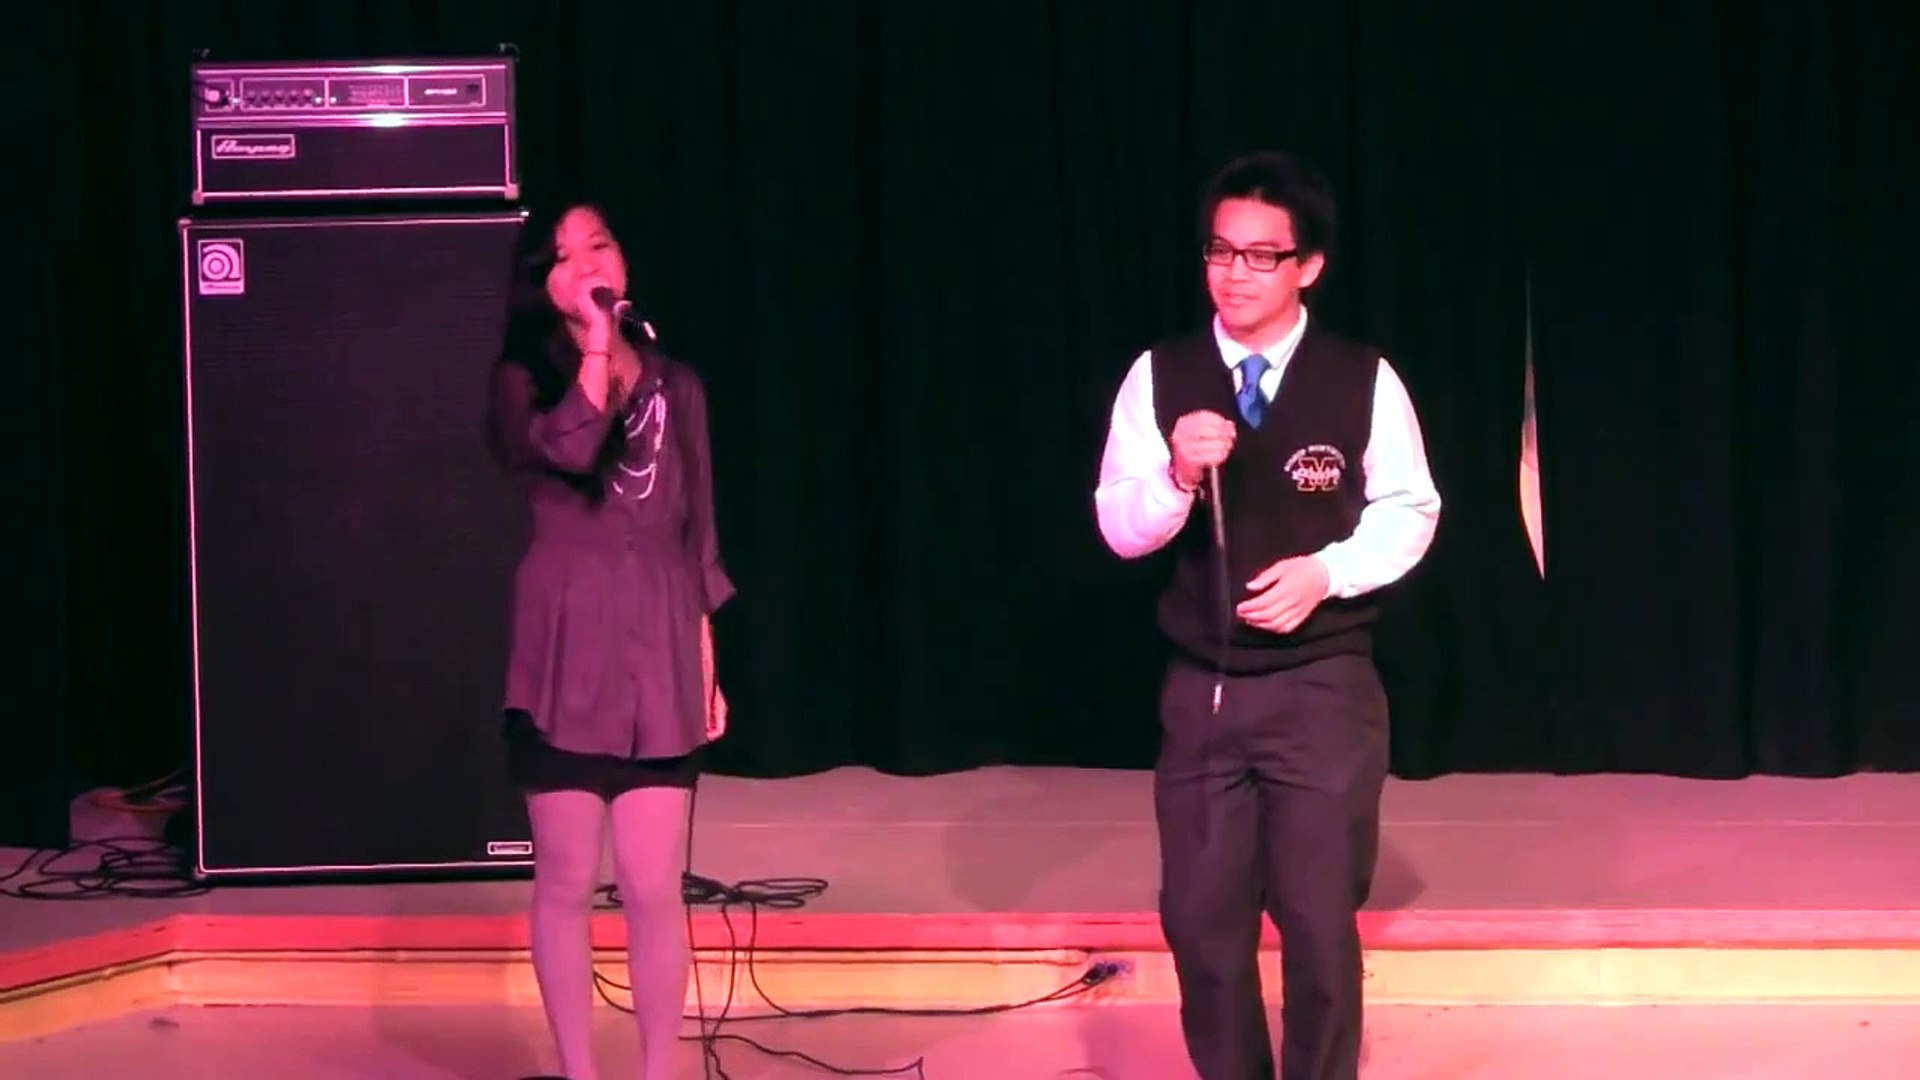 Talent show dance and signing 2014/15 | Best funny talent show in the world